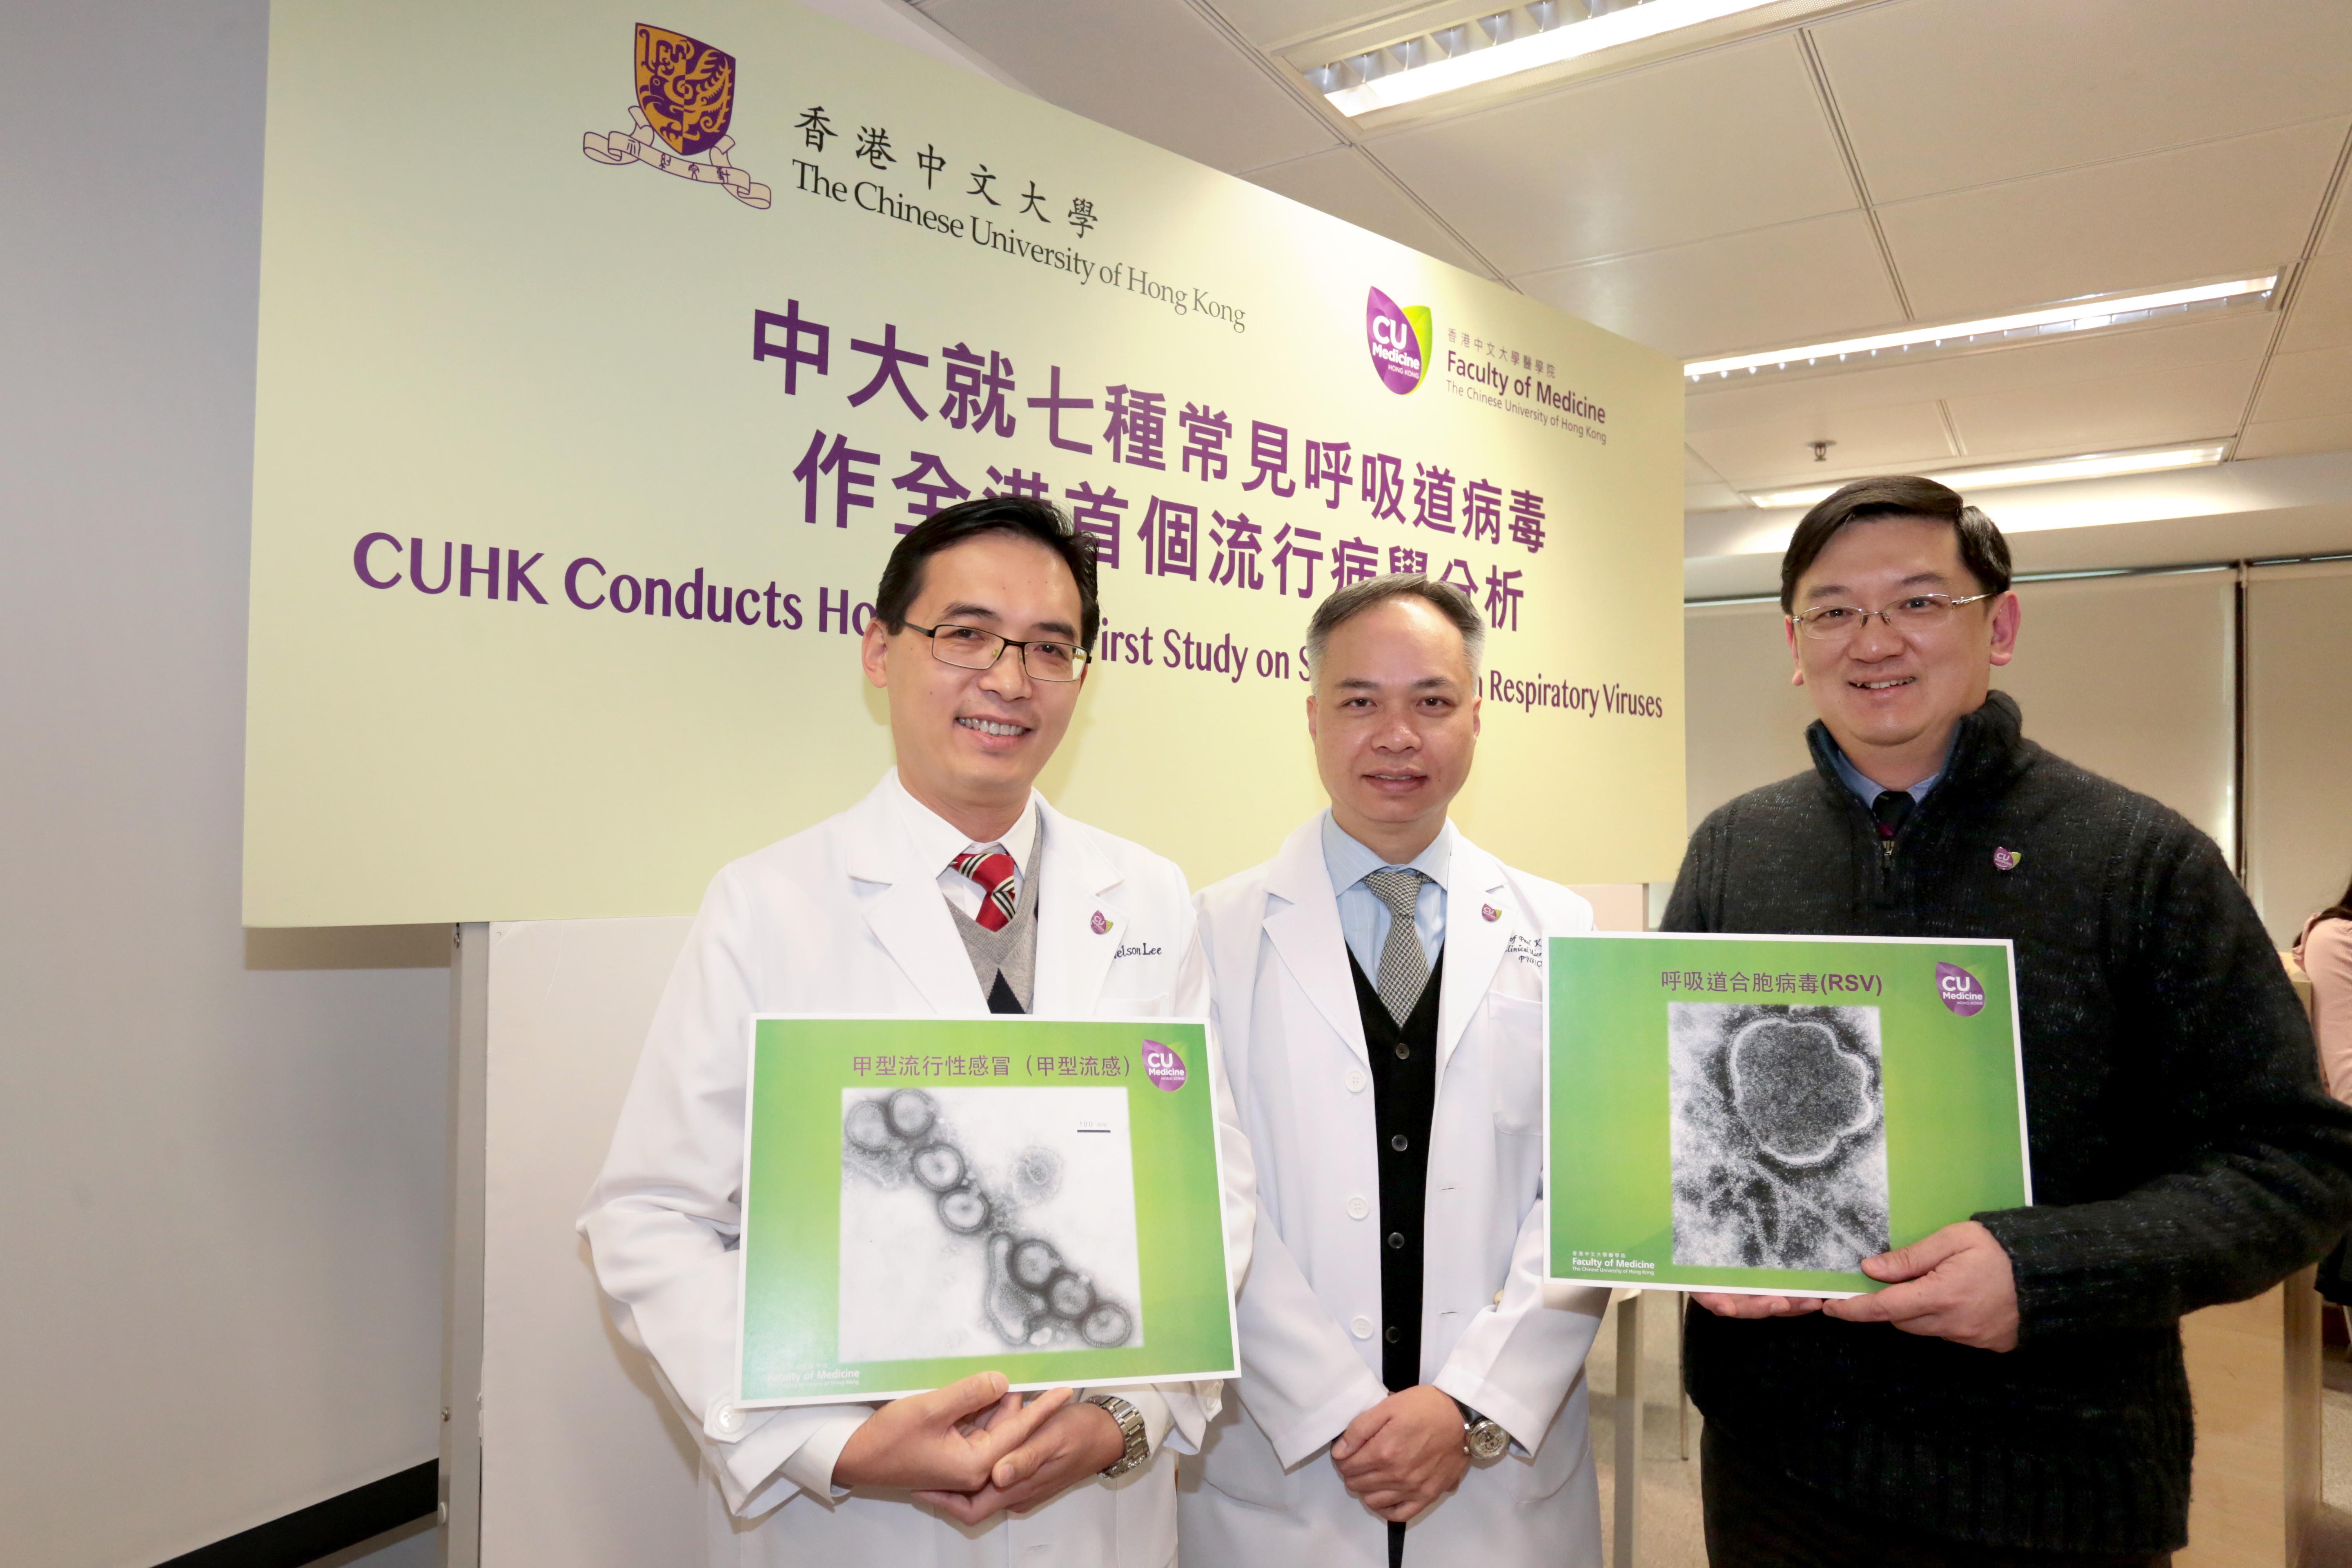 Professors from Department of Paedetrics present Hong Kong’s First Study on Seven Common Respiratory Viruses, revealing two prevalent fatal types.